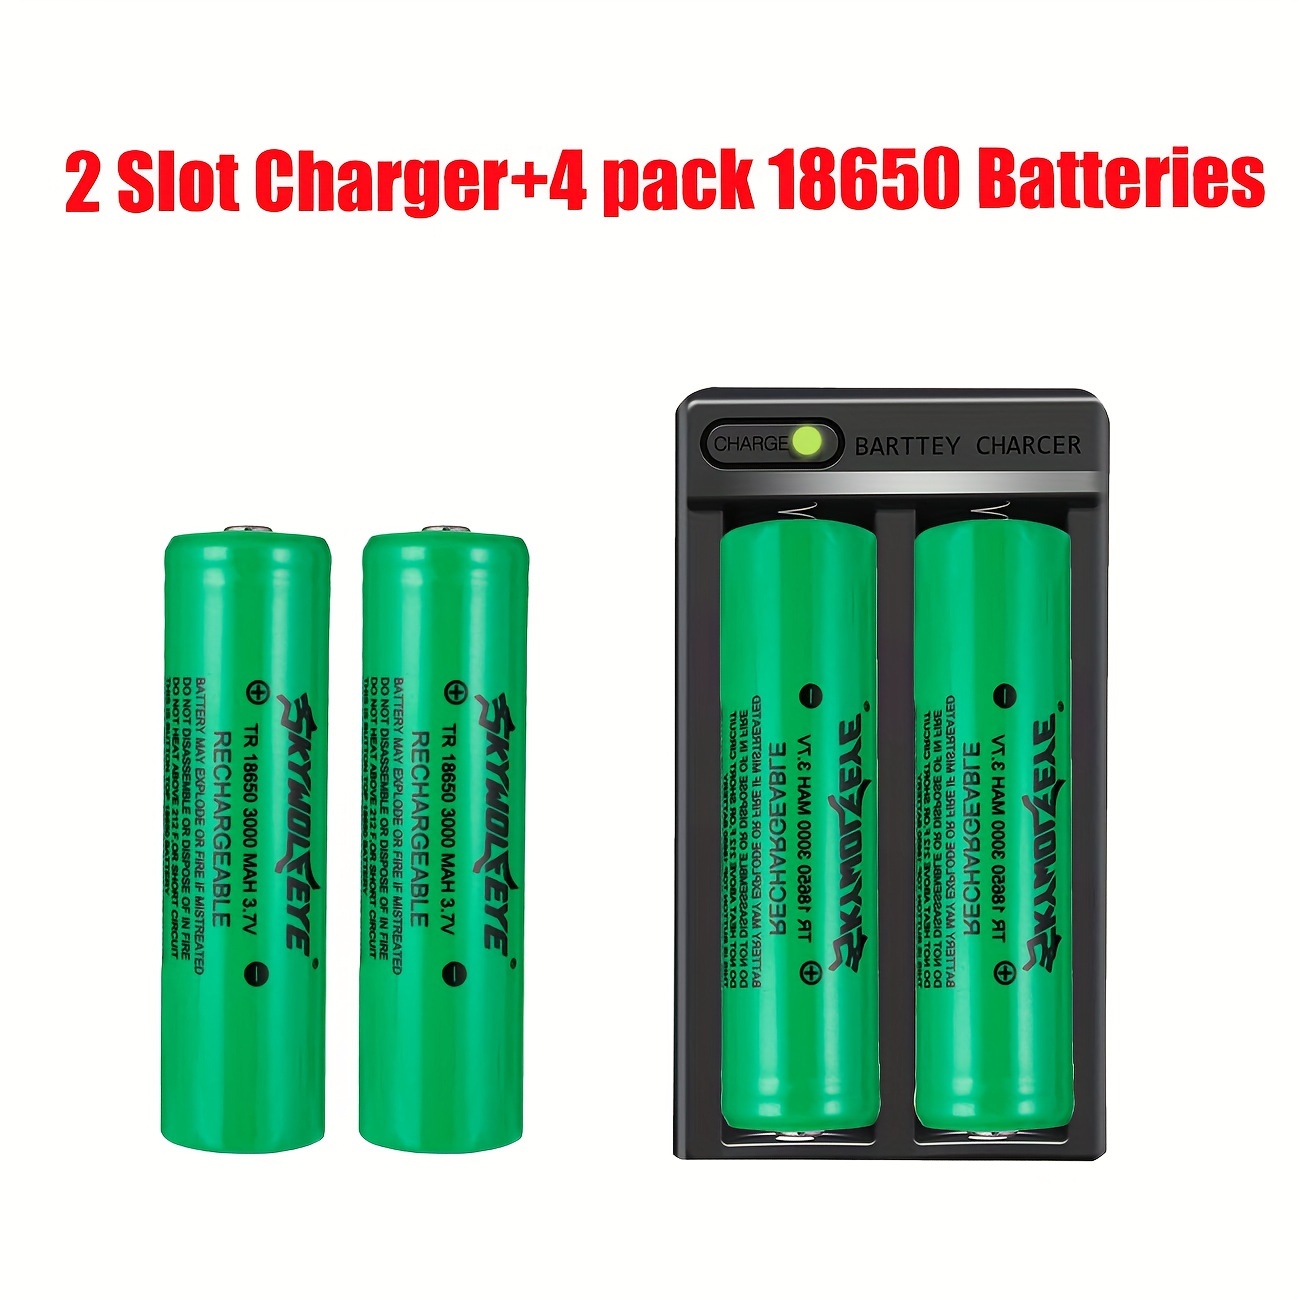 

4 Pack 18650 Rechargeable Battery, Button Top With 18650 Battery Charger, 18650 2-slot Smart Battery Charger For 3.7v Rechargeable Batteries